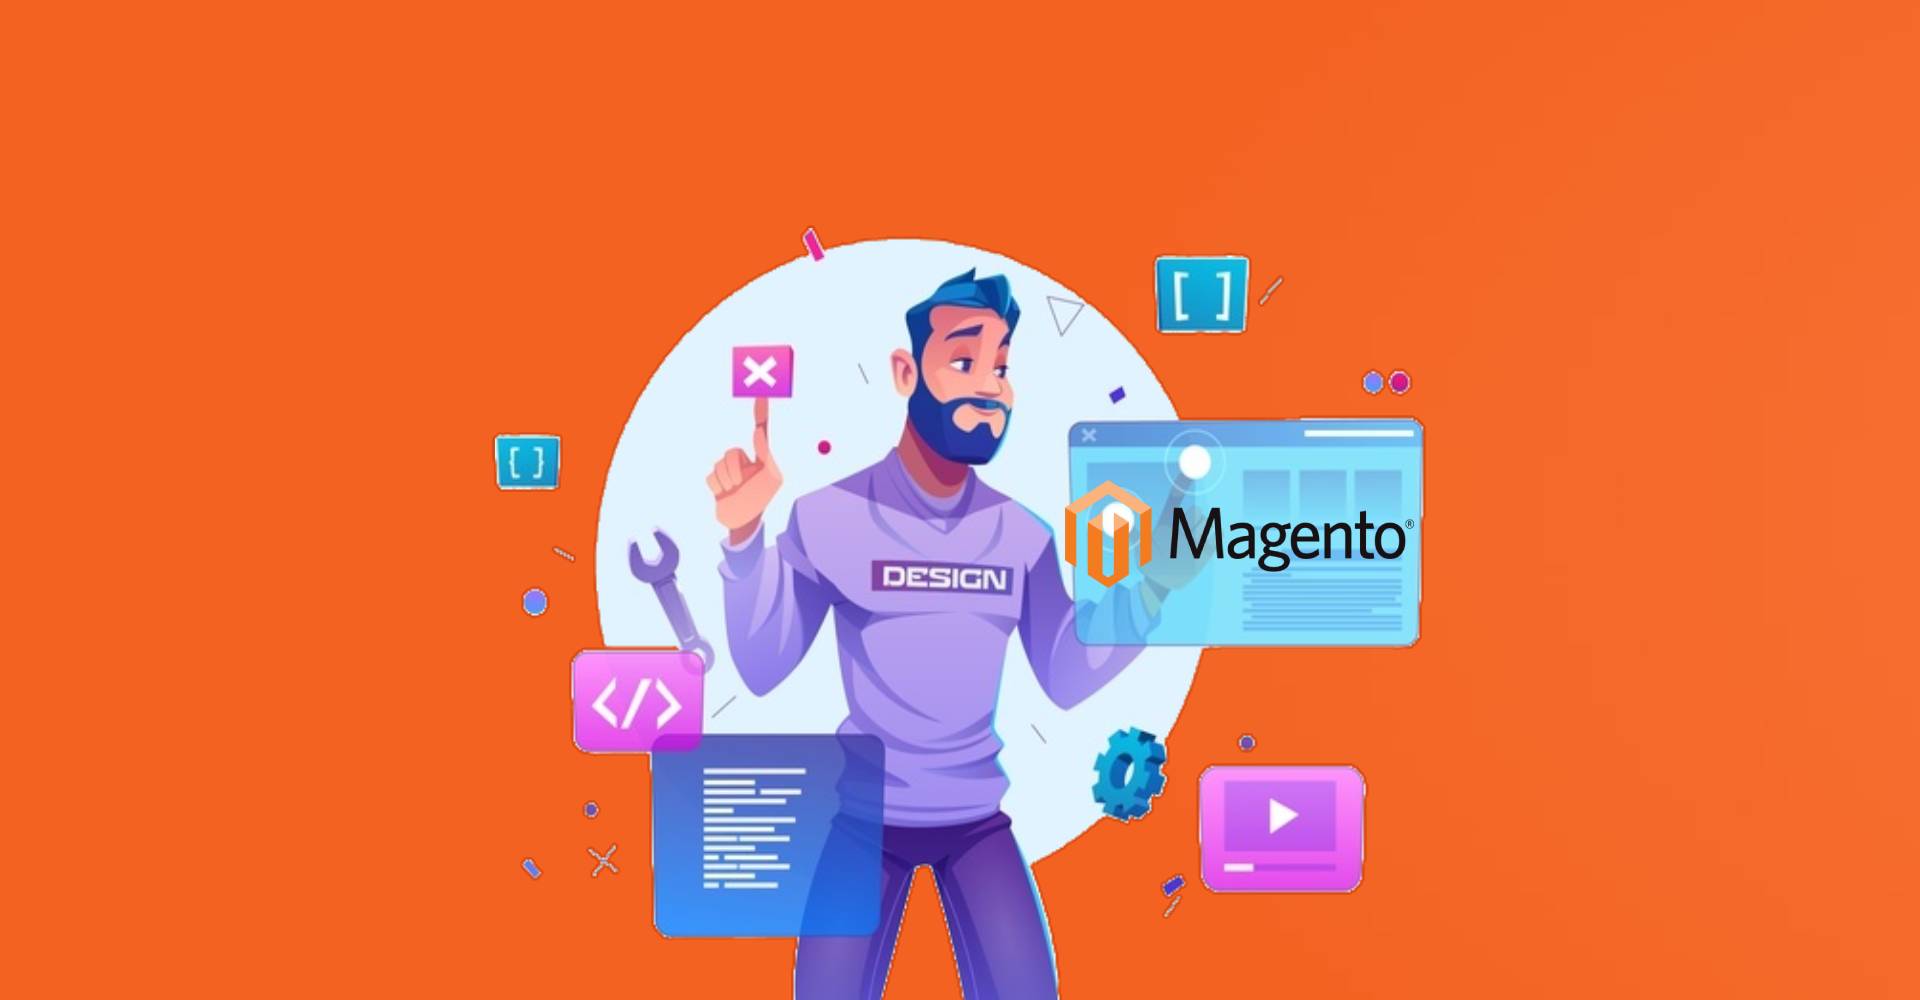 Hire Magento Developers to Help You Run a thriving Online Business